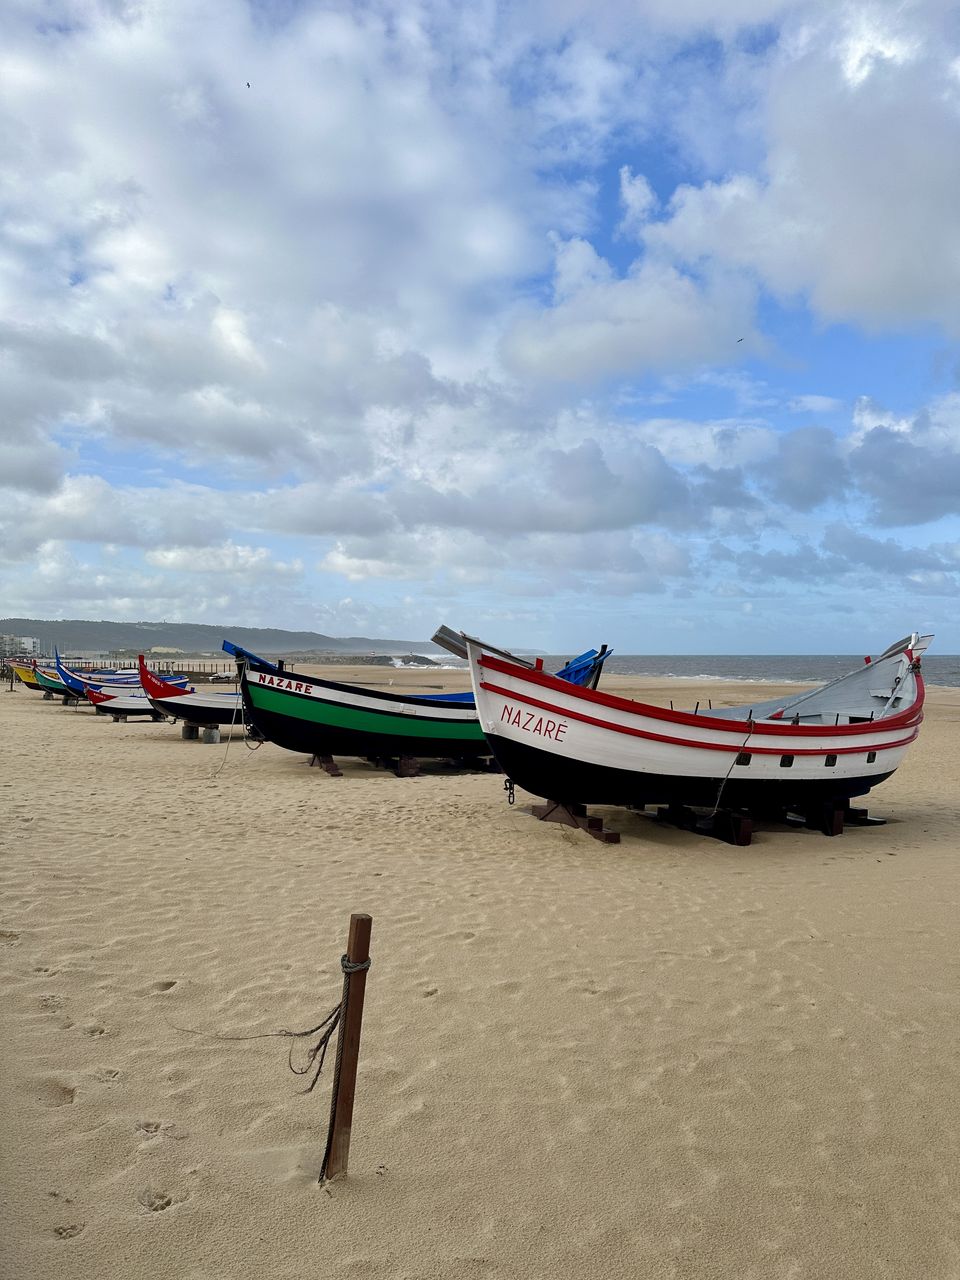 beach, nautical vessel, sand, land, water, transportation, sky, cloud, sea, mode of transportation, nature, shore, boat, moored, long-tail boat, vehicle, scenics - nature, coast, tranquility, travel, beauty in nature, day, no people, outdoors, travel destinations, tranquil scene, boating, ocean, holiday, non-urban scene, watercraft, vacation, trip, blue, tourism, absence